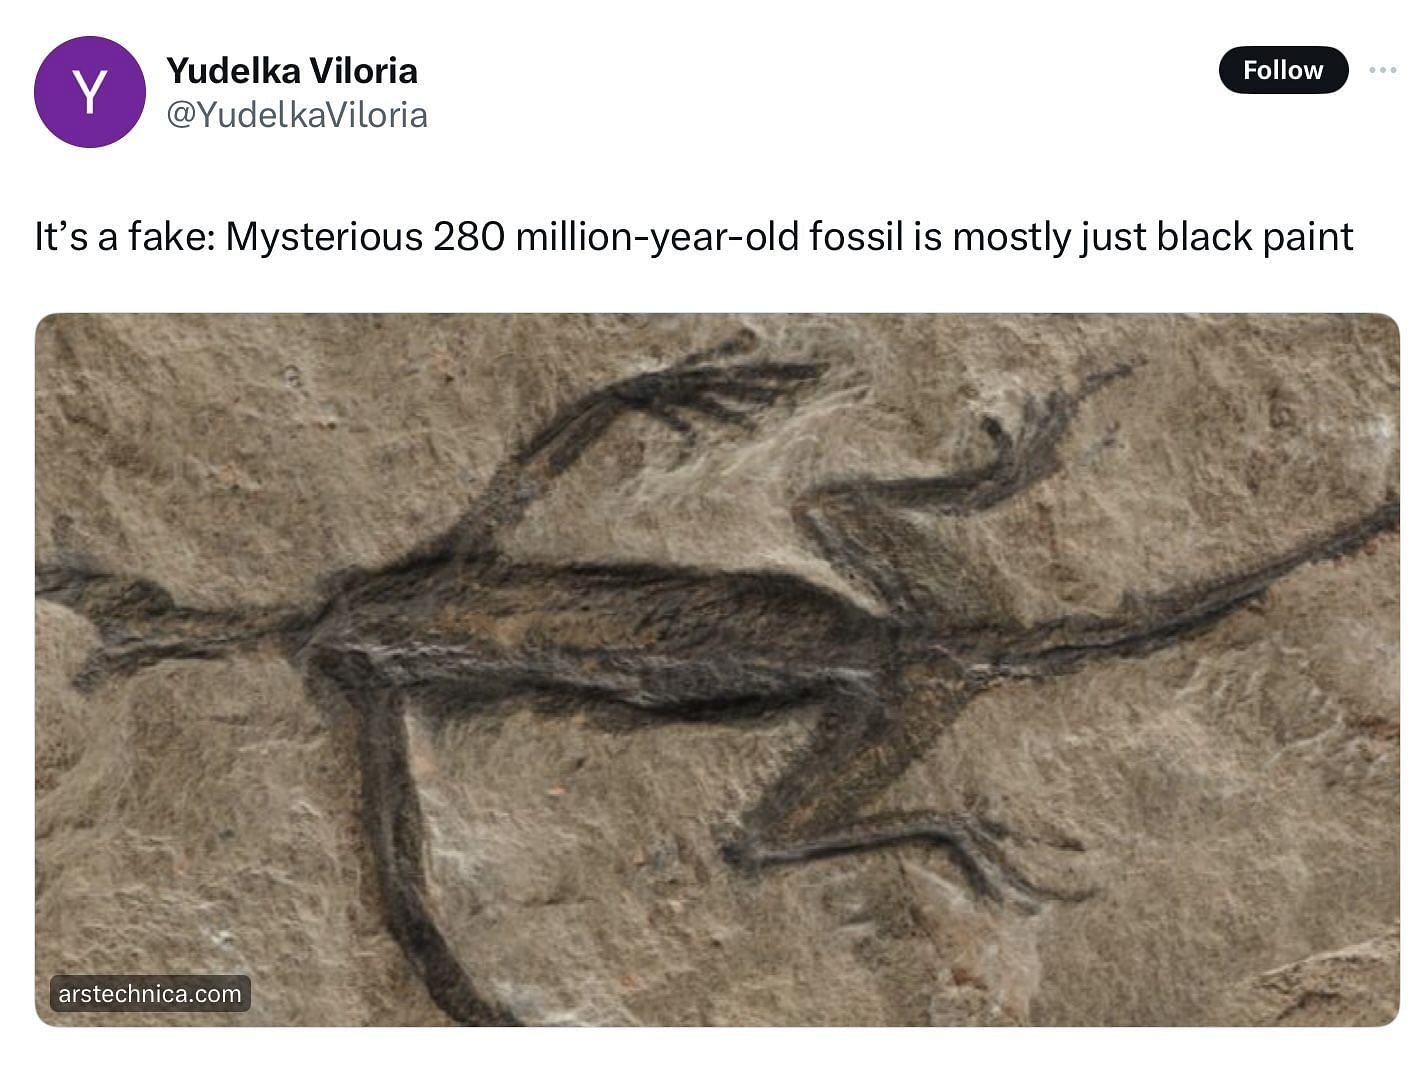 New study shows a 280 million-year-old reptile specimen is a fake (Image via @YudelkaViloria/X)